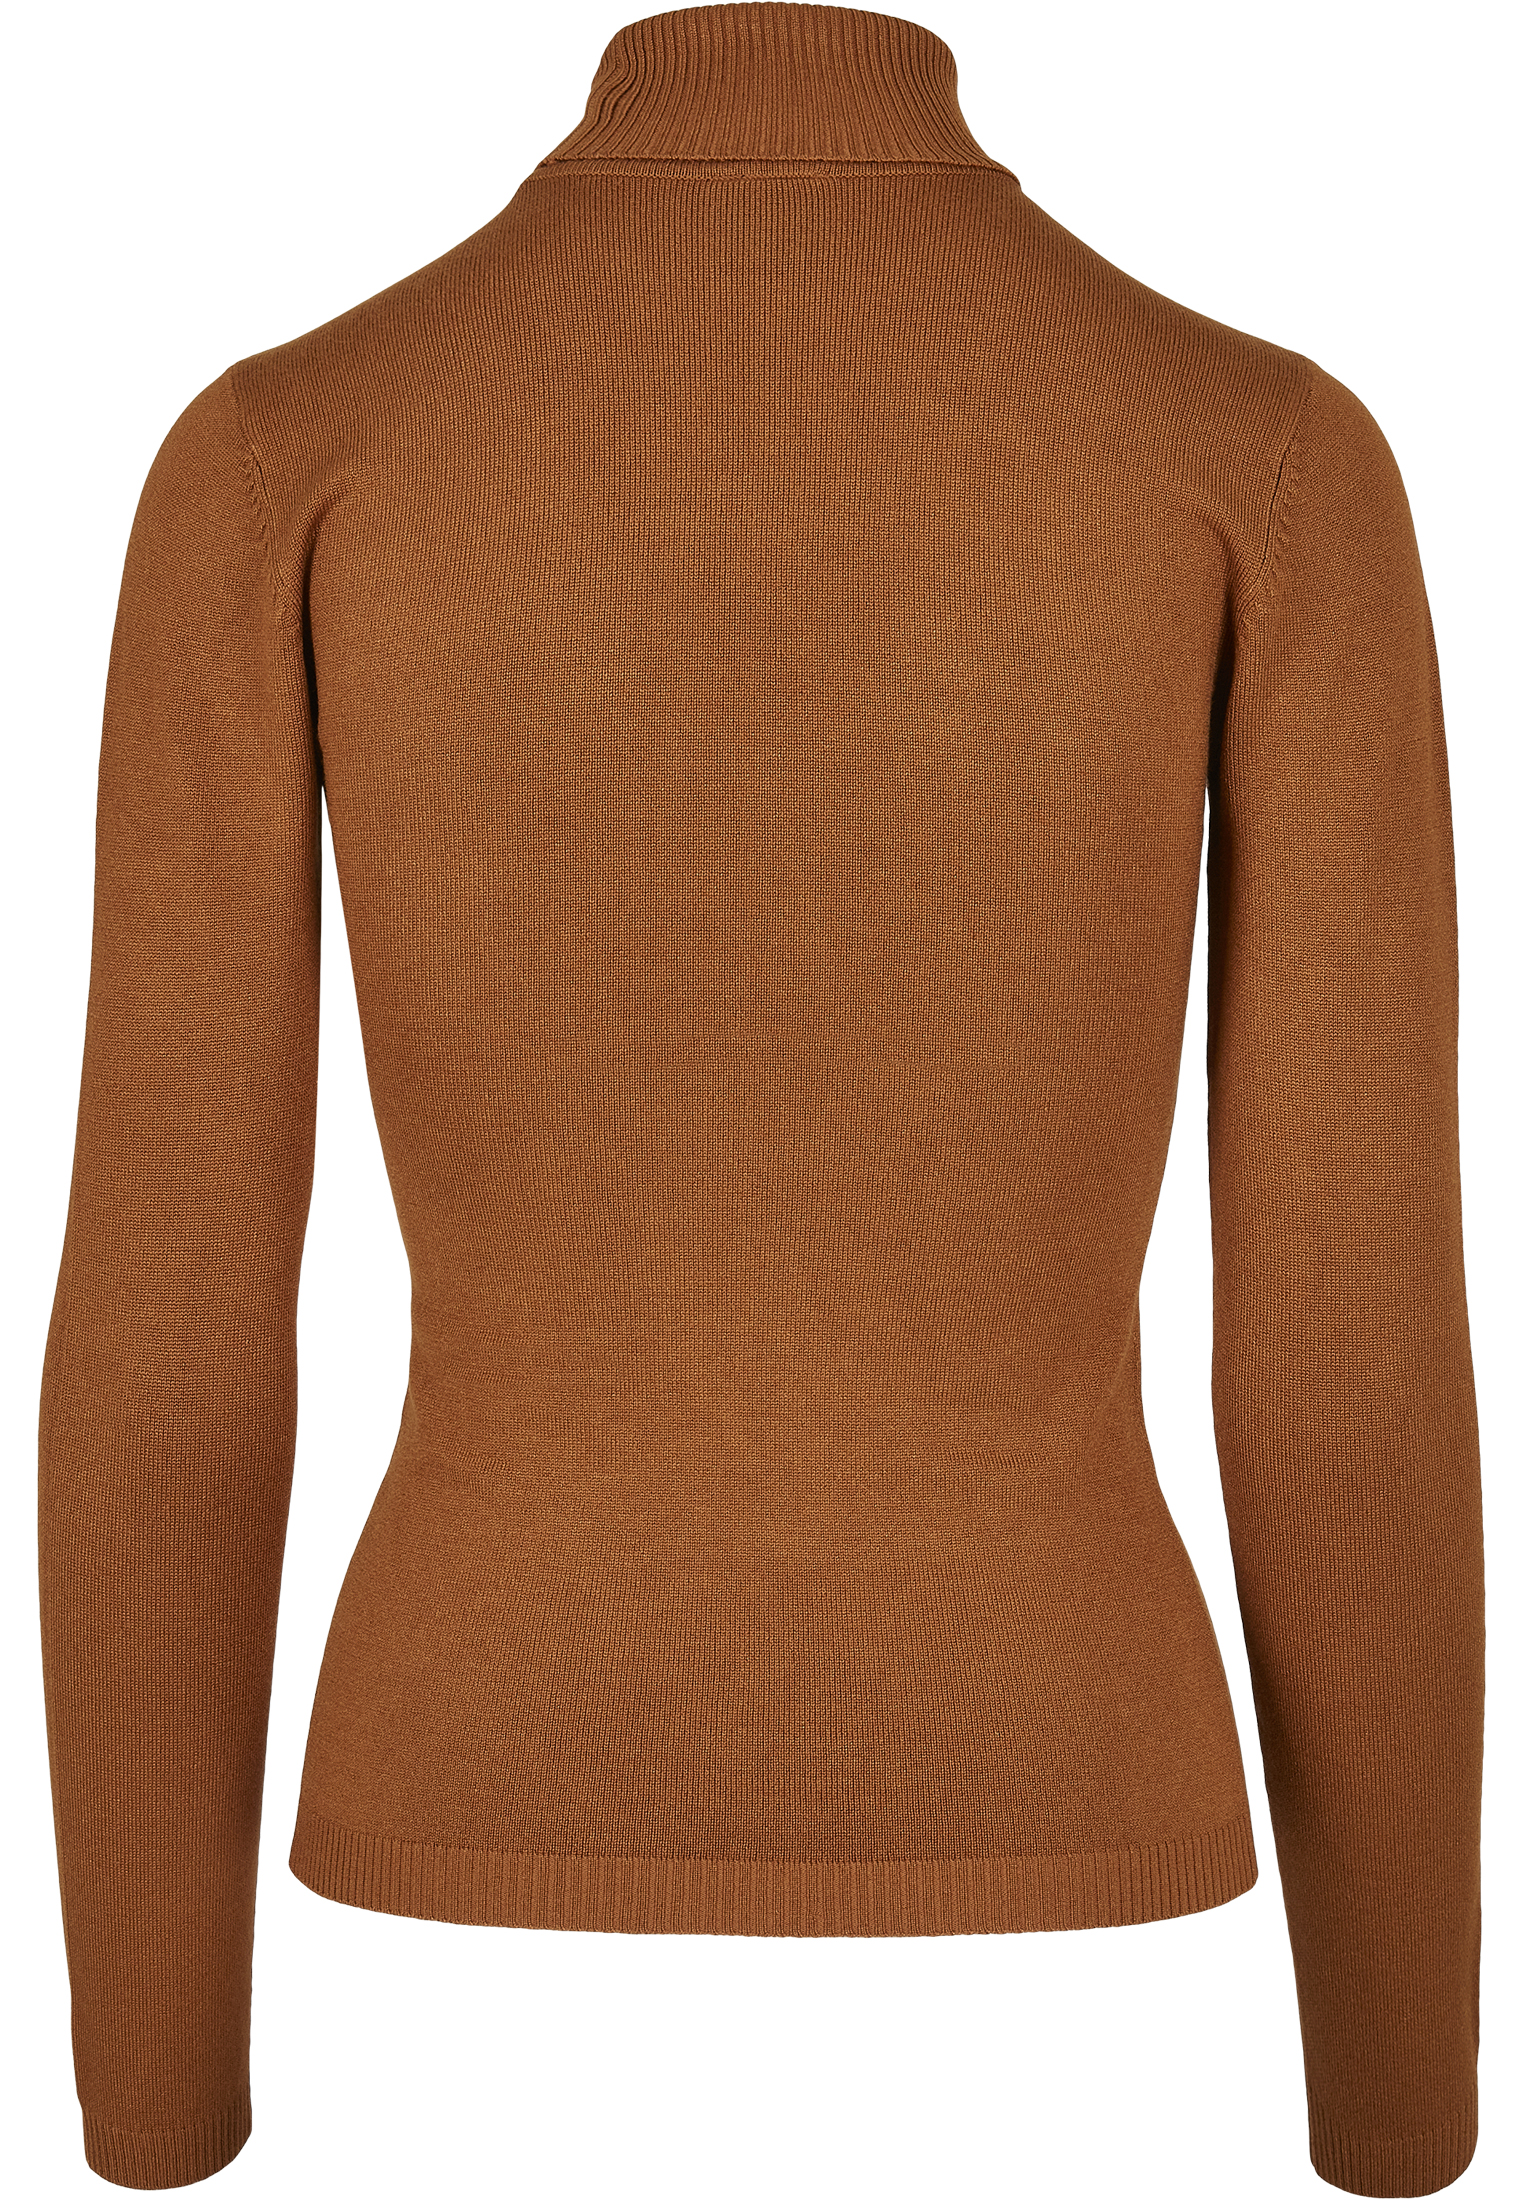 Curvy Ladies Basic Turtleneck Sweater in Farbe toffee